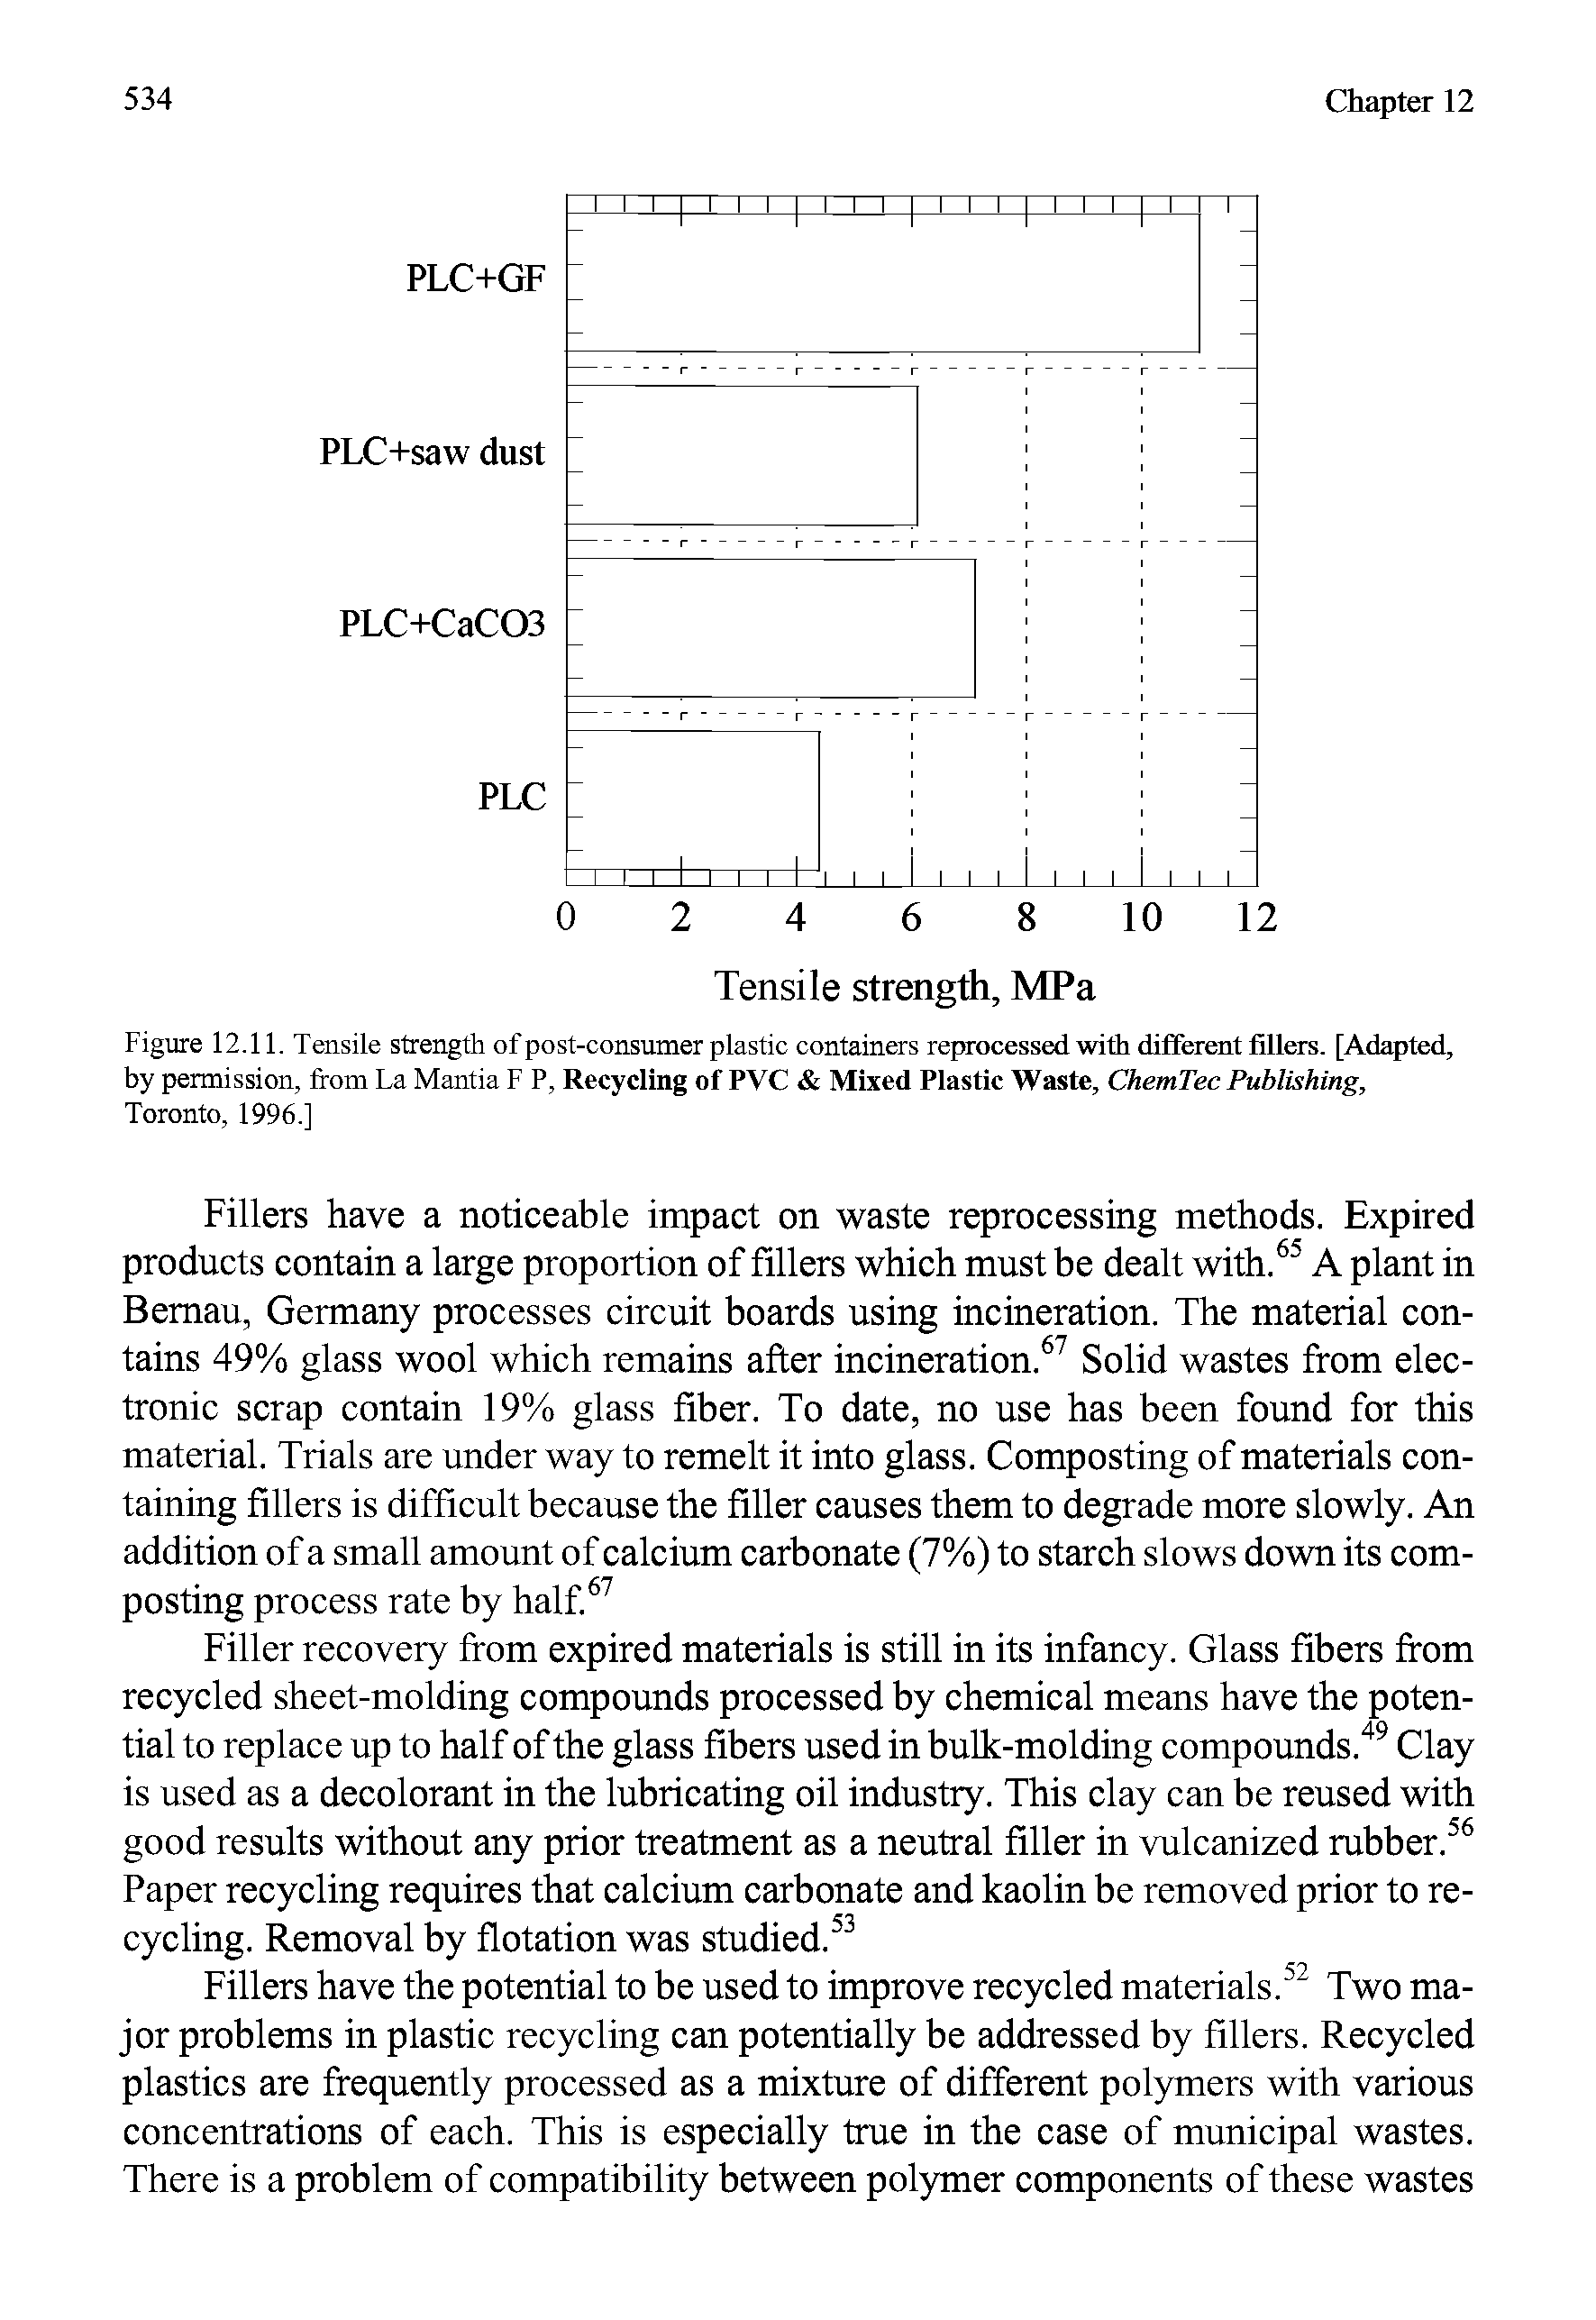 Figure 12.11. Tensile strength of post-consumer plastic containers reprocessed with different fillers. [Adapted, by permission, from La Mantia F P. Recycling of PVC Mixed Plastic Waste, ChemTec Publishing, Toronto, 1996.]...